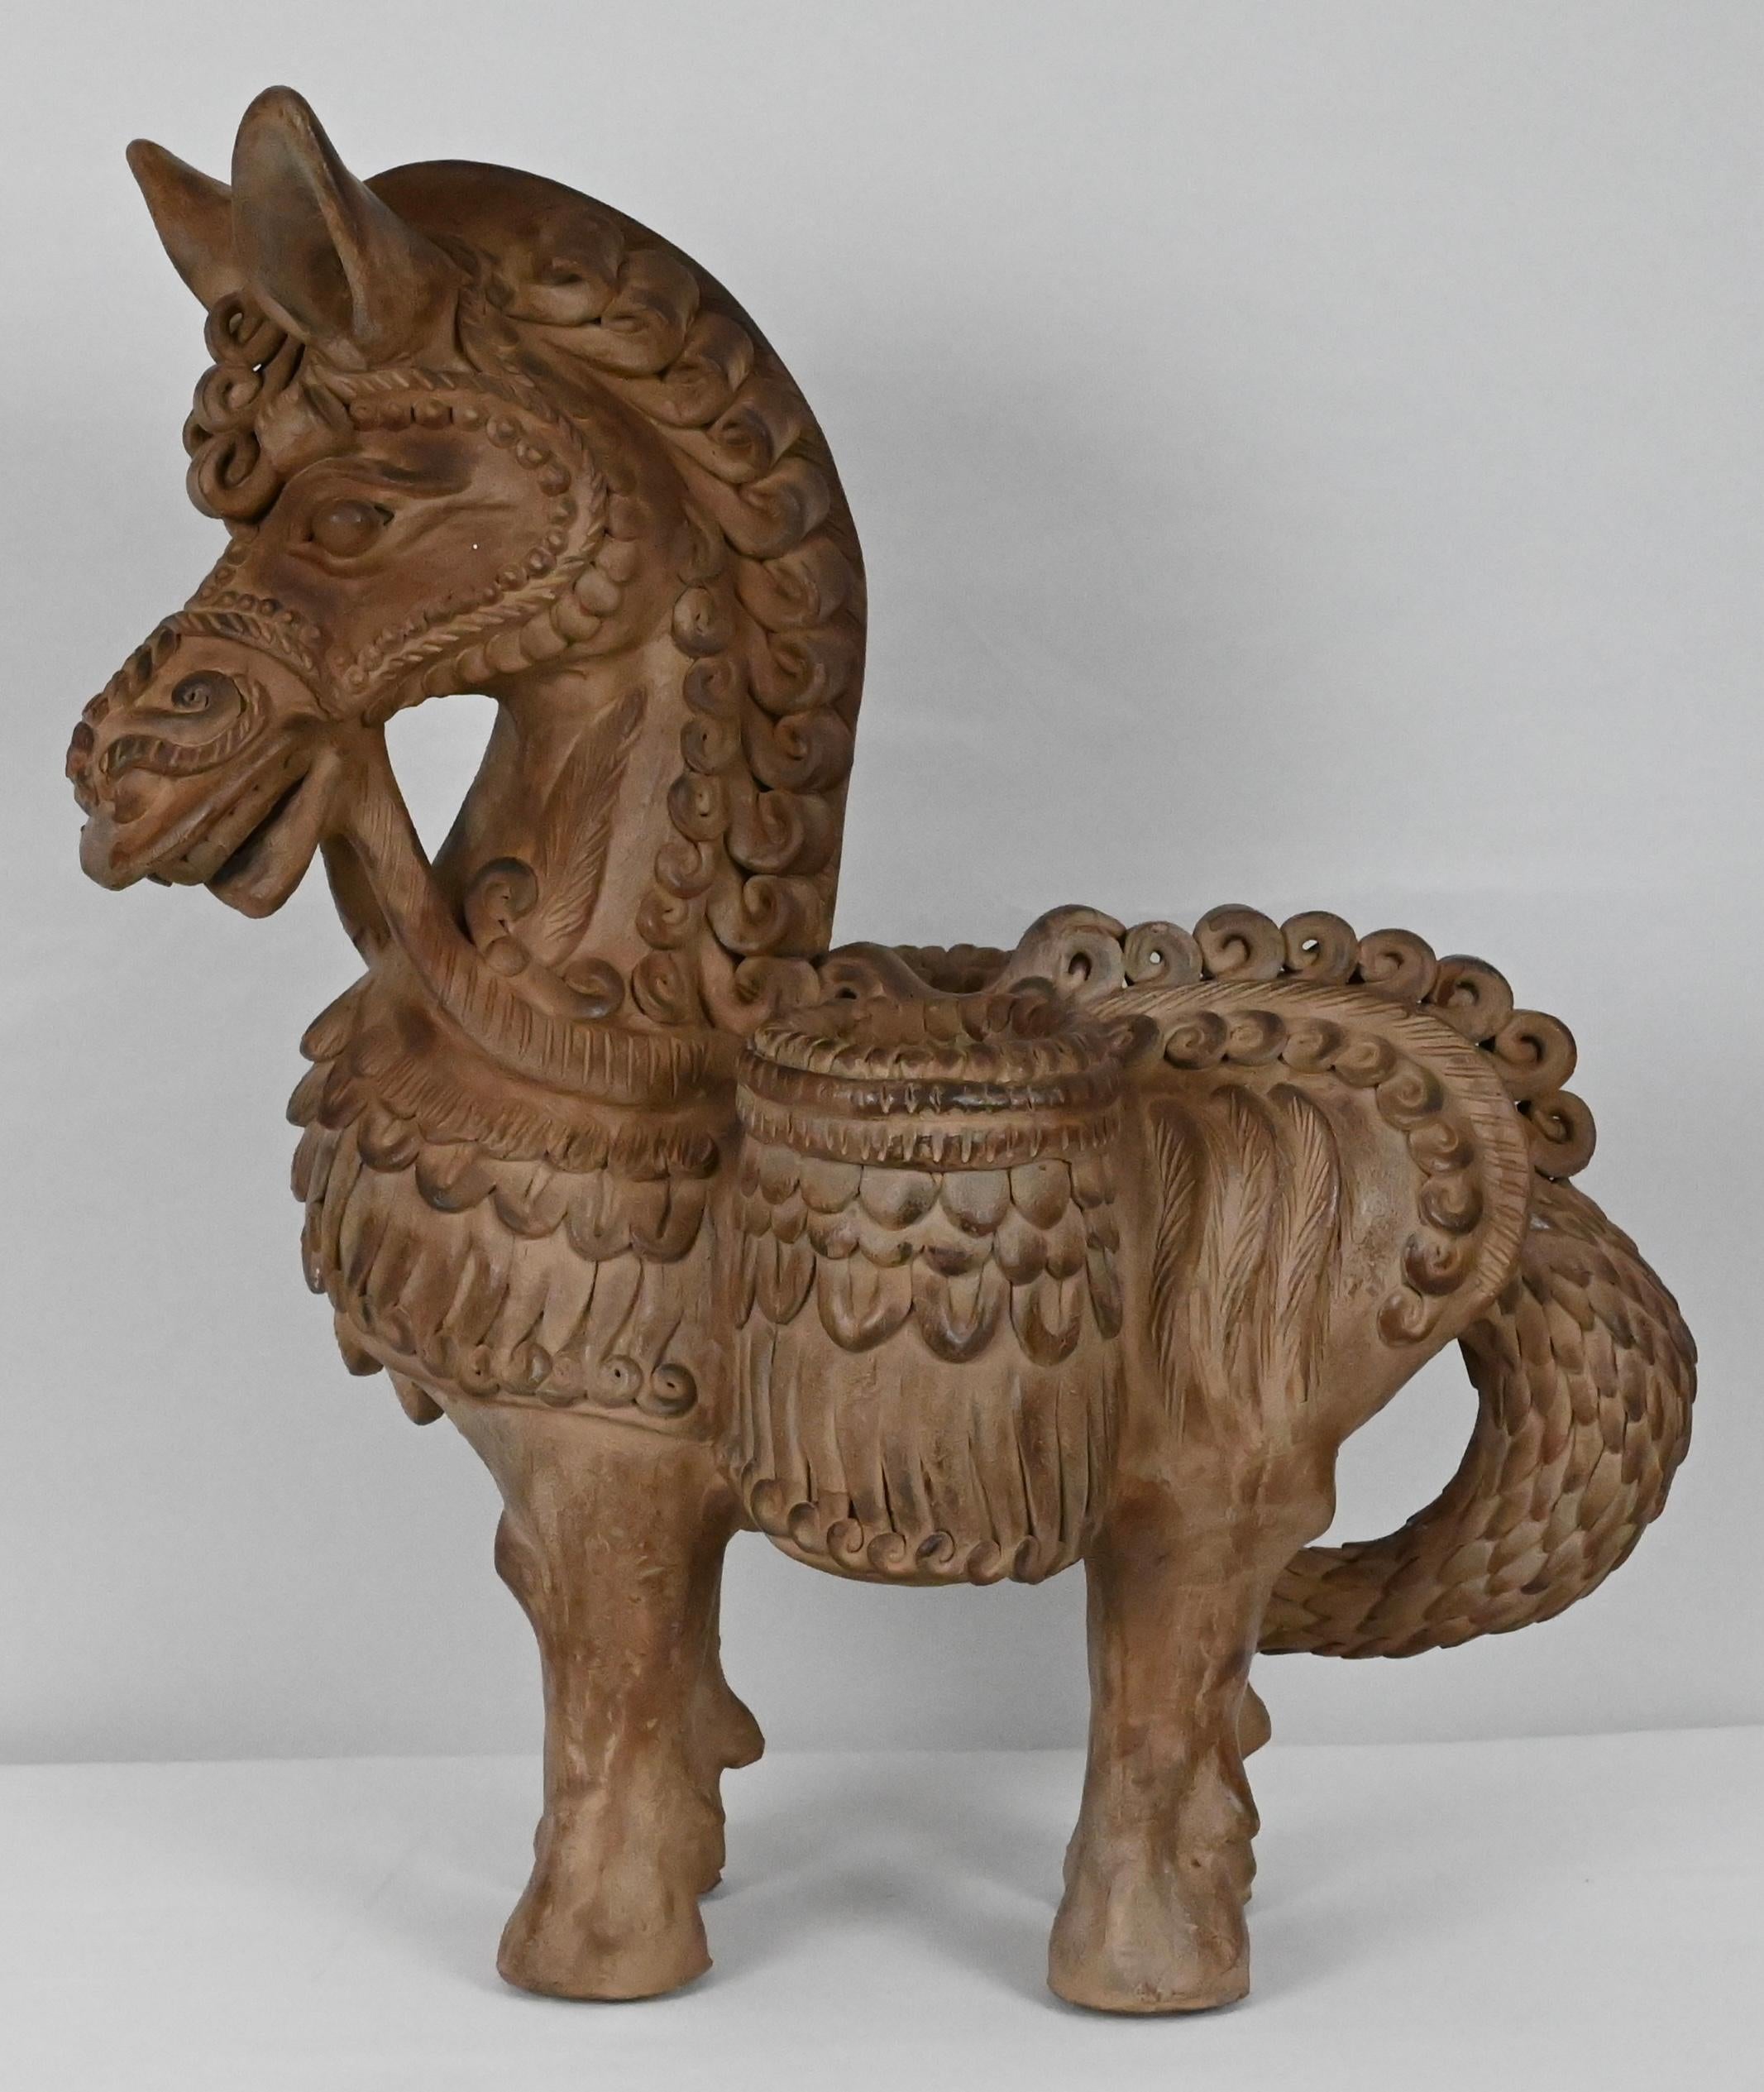 Hand Carved Terracotta Horse Sculpture by Ugo Zaccagnini In Good Condition For Sale In Miami, FL